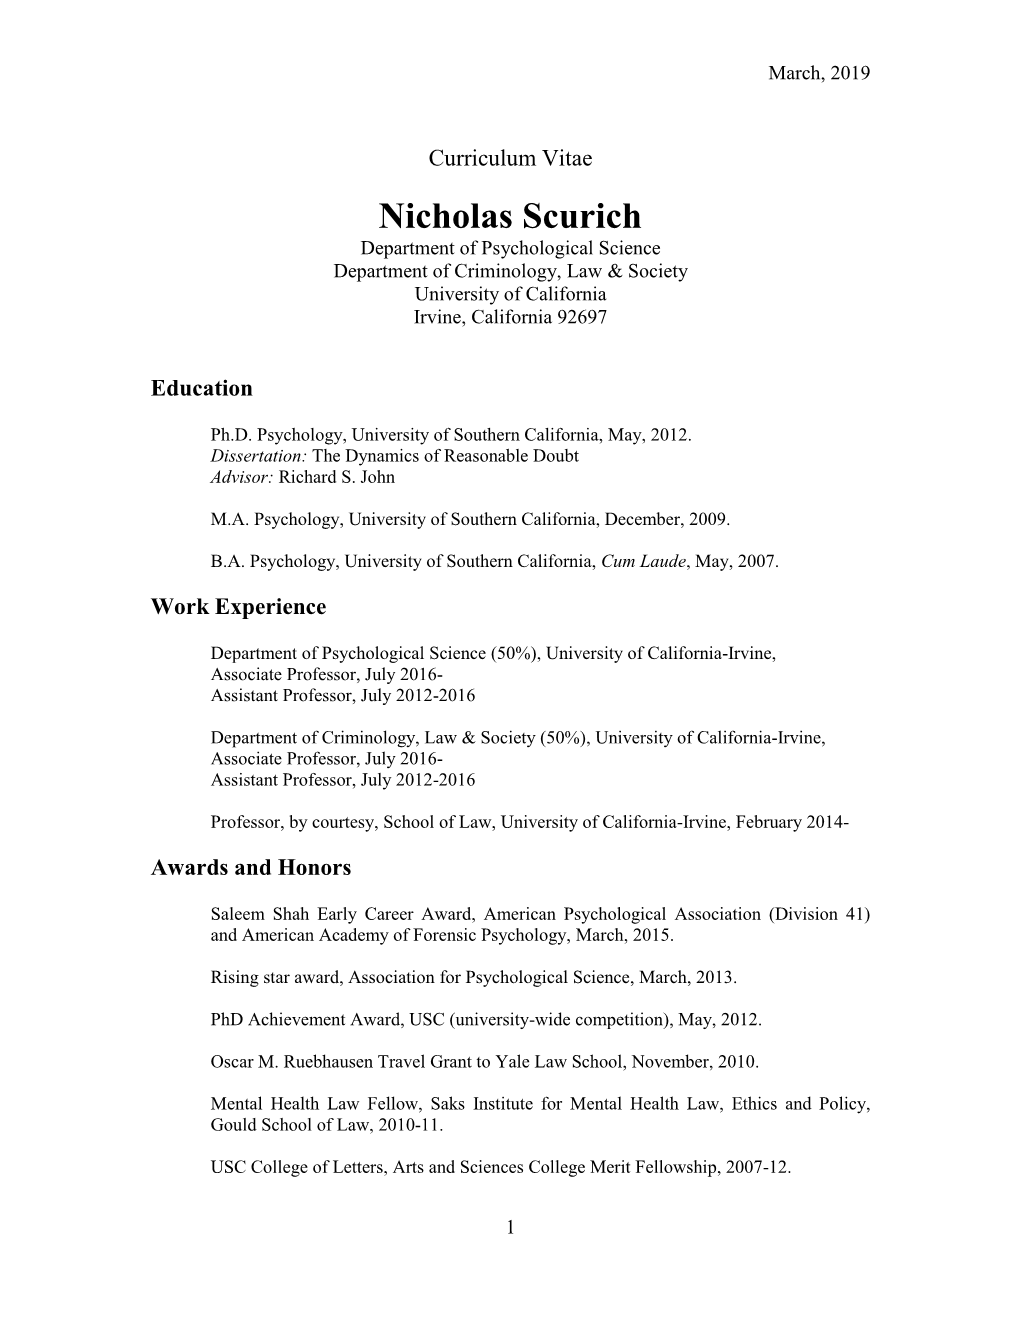 Nicholas Scurich Department of Psychological Science Department of Criminology, Law & Society University of California Irvine, California 92697